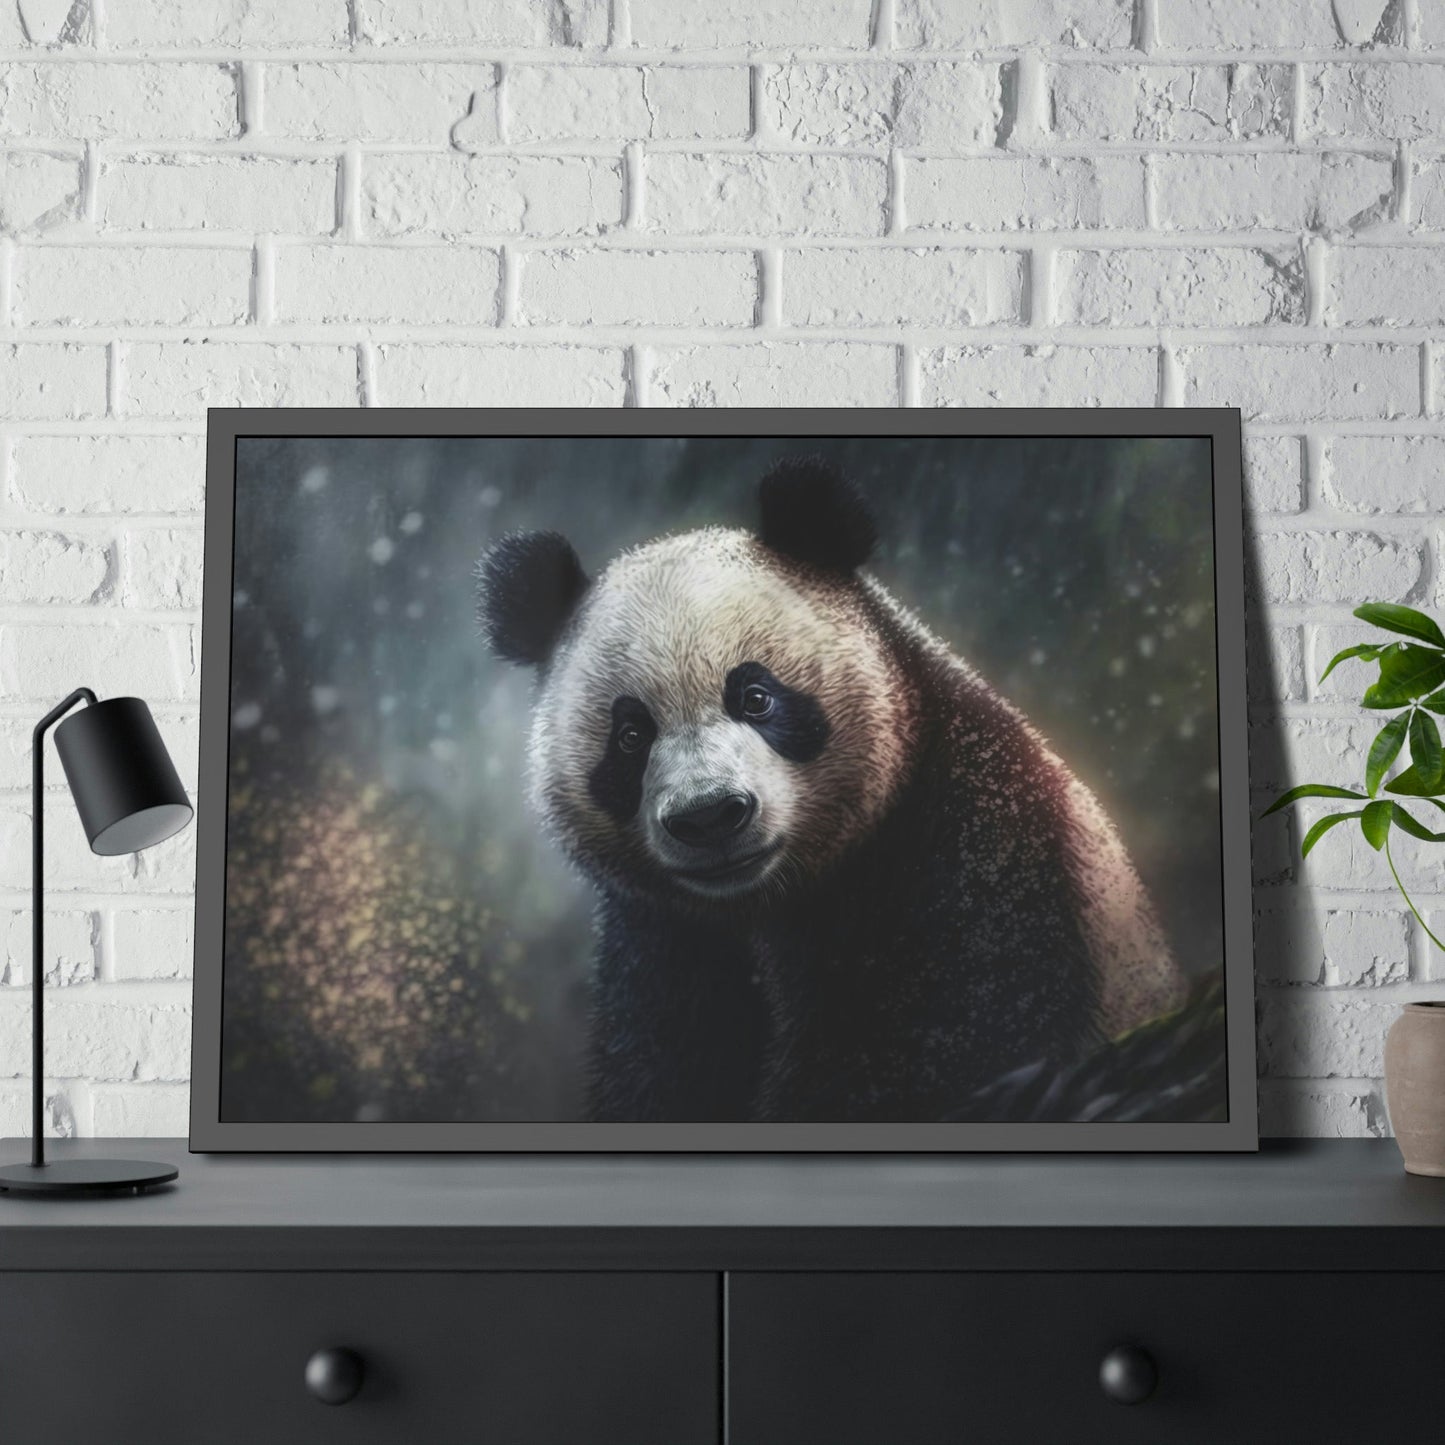 A Panda's World: A Canvas That Reveals the Wonders of Nature